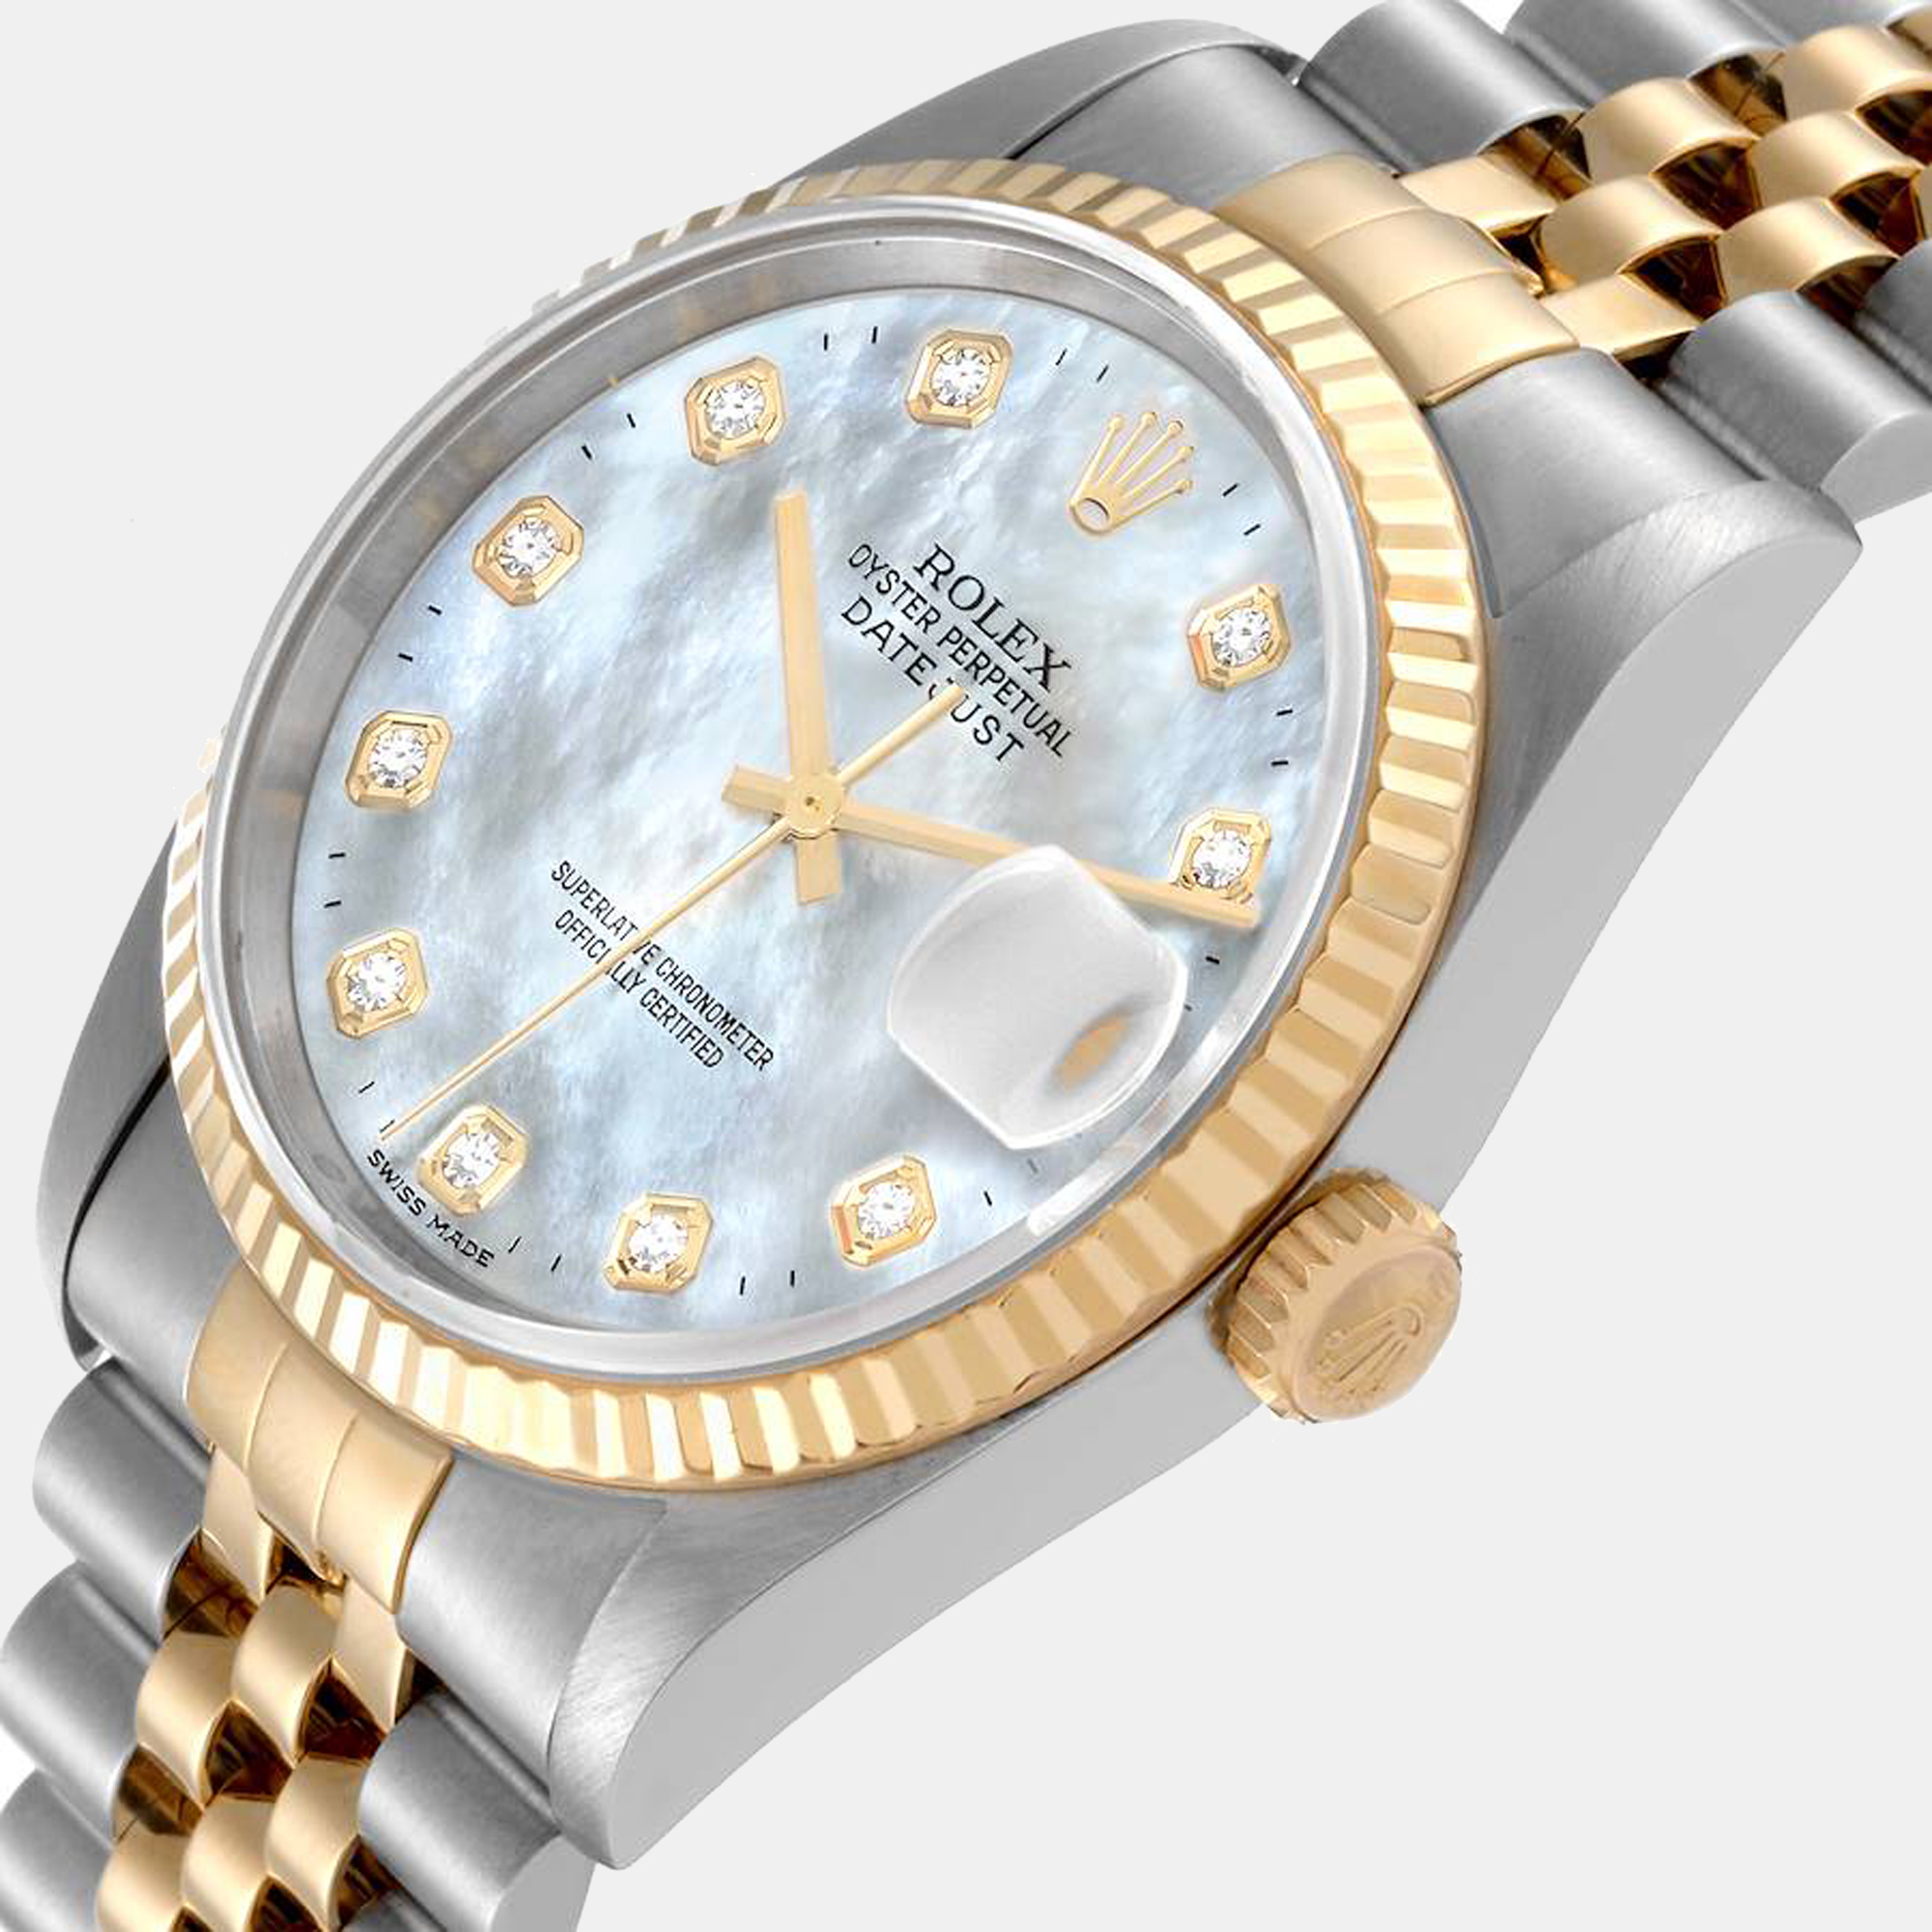 

Rolex MOP Diamonds 18k Yellow Gold And Stainless Steel Datejust 16233 Men's Wristwatch 36 mm, White